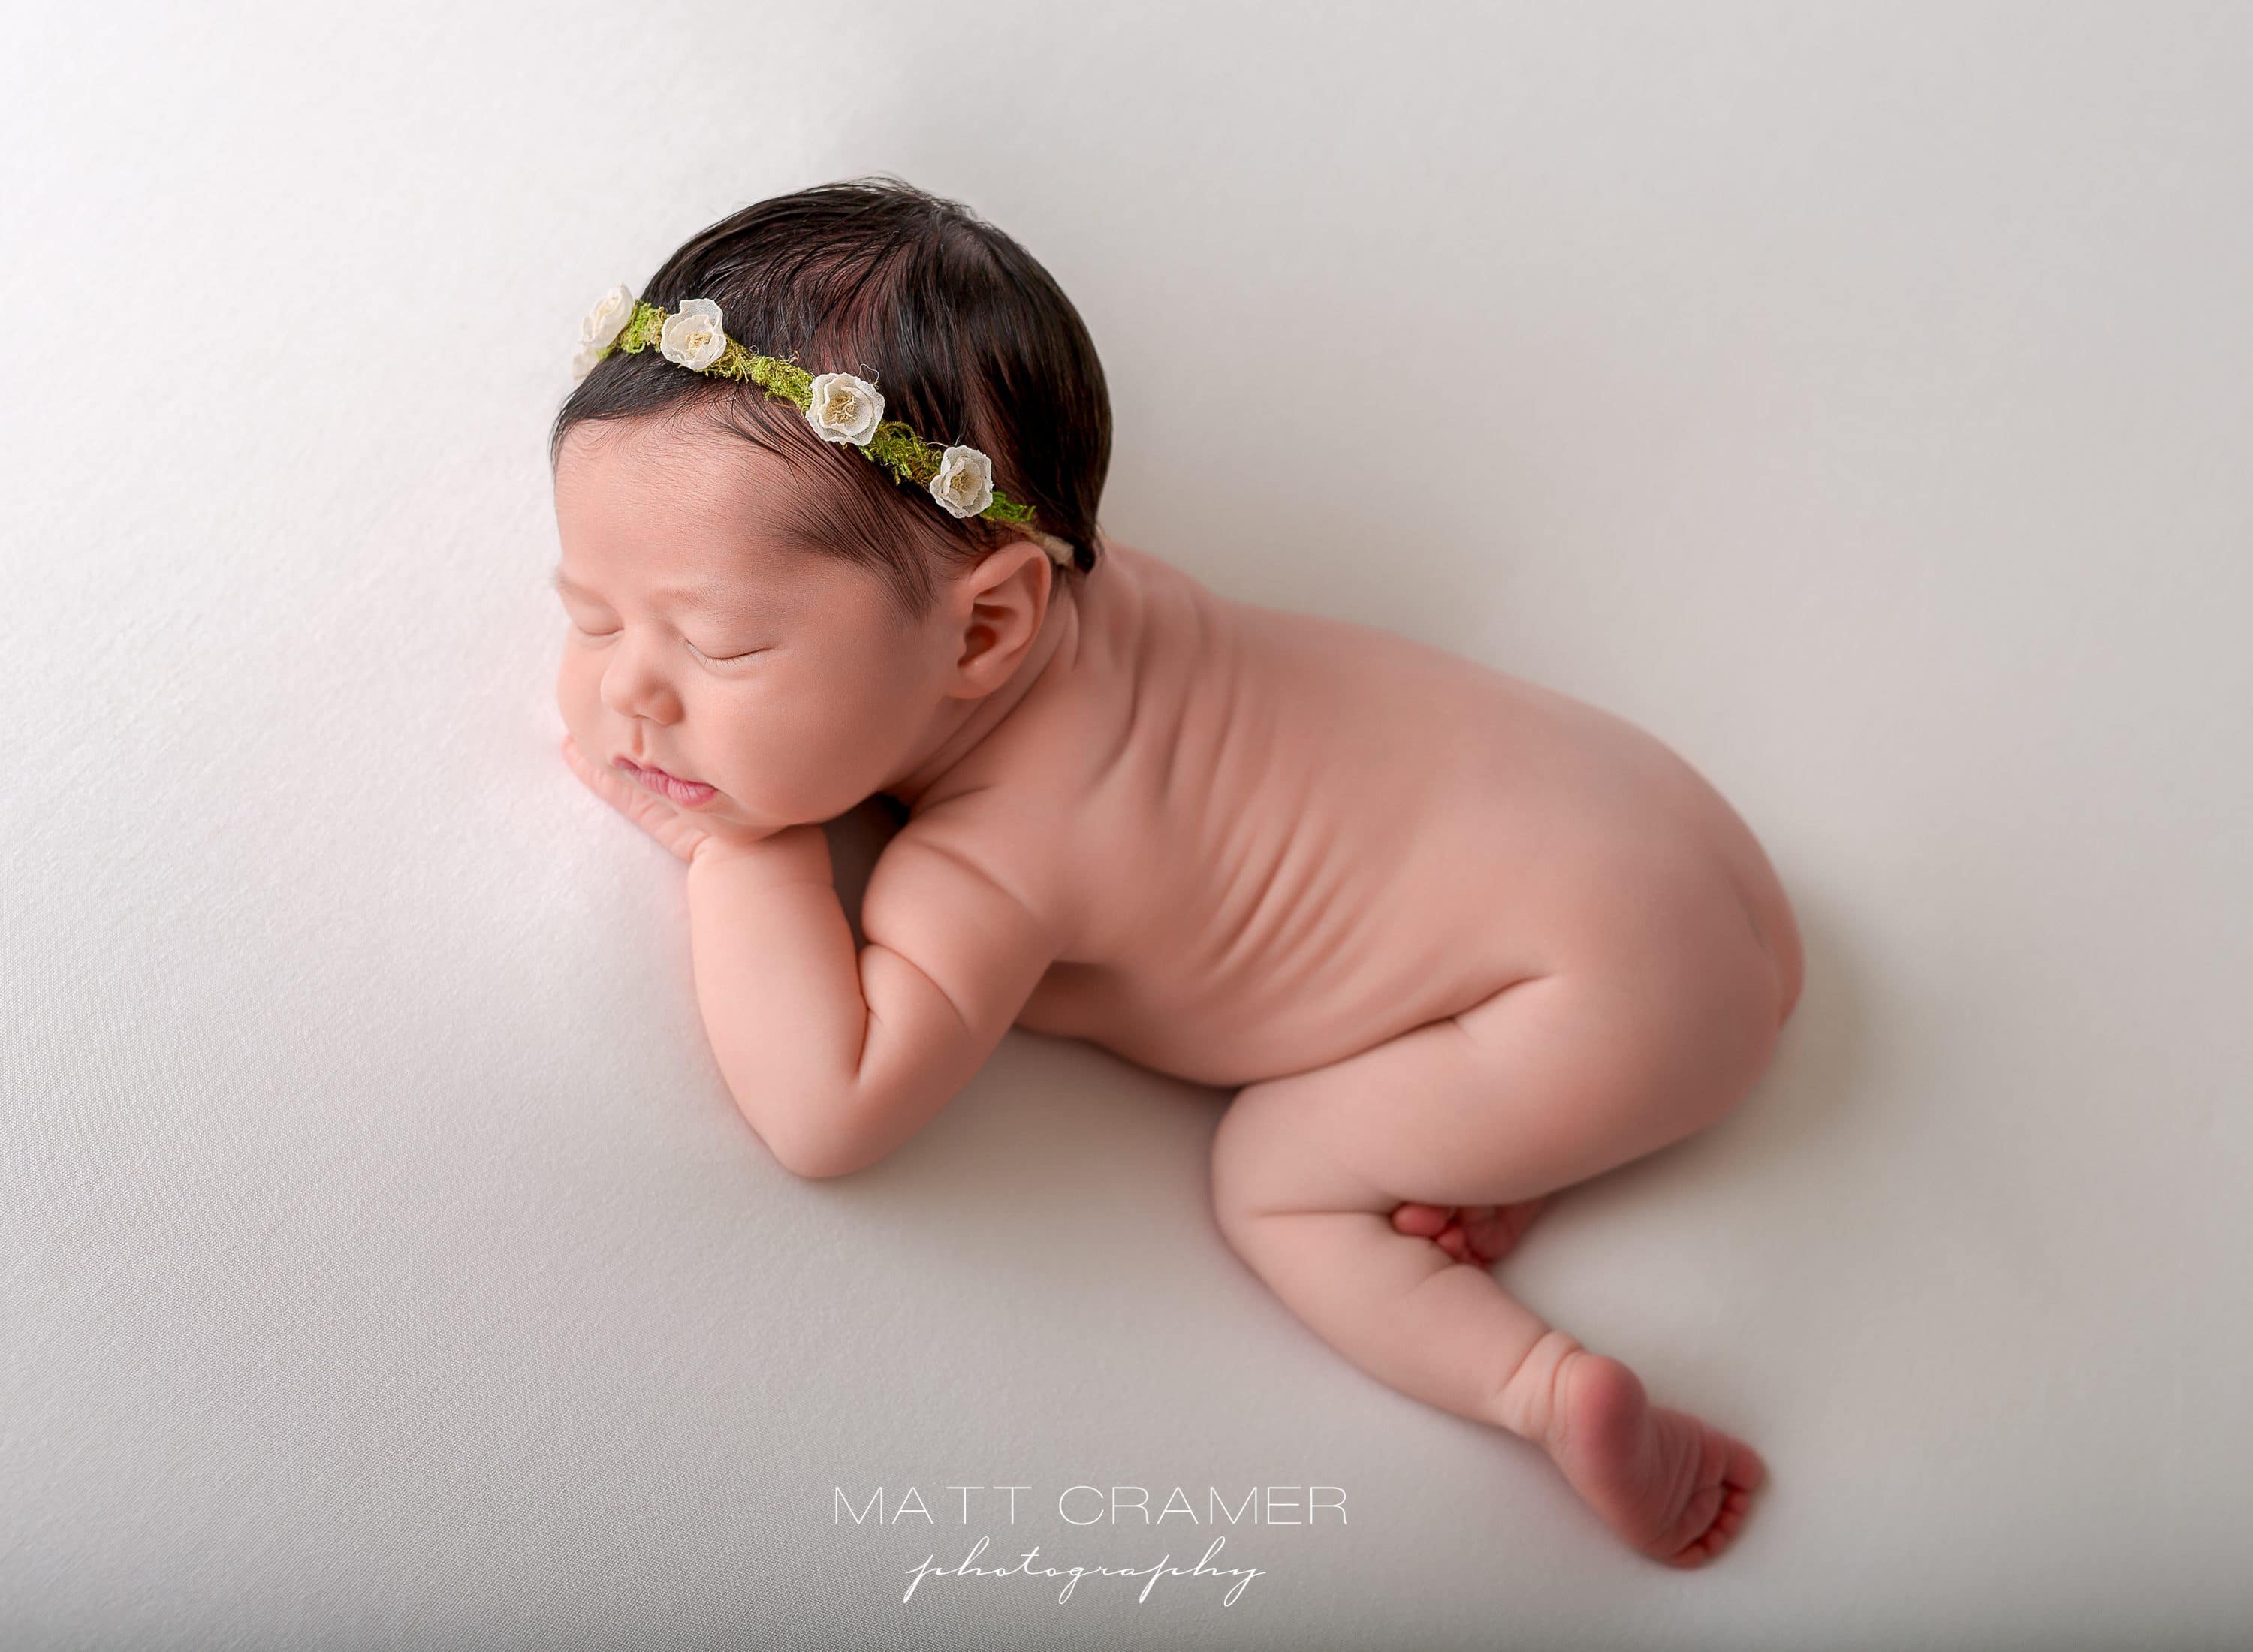 newborn infant with floral headband photographed during newborn session in Los angeles